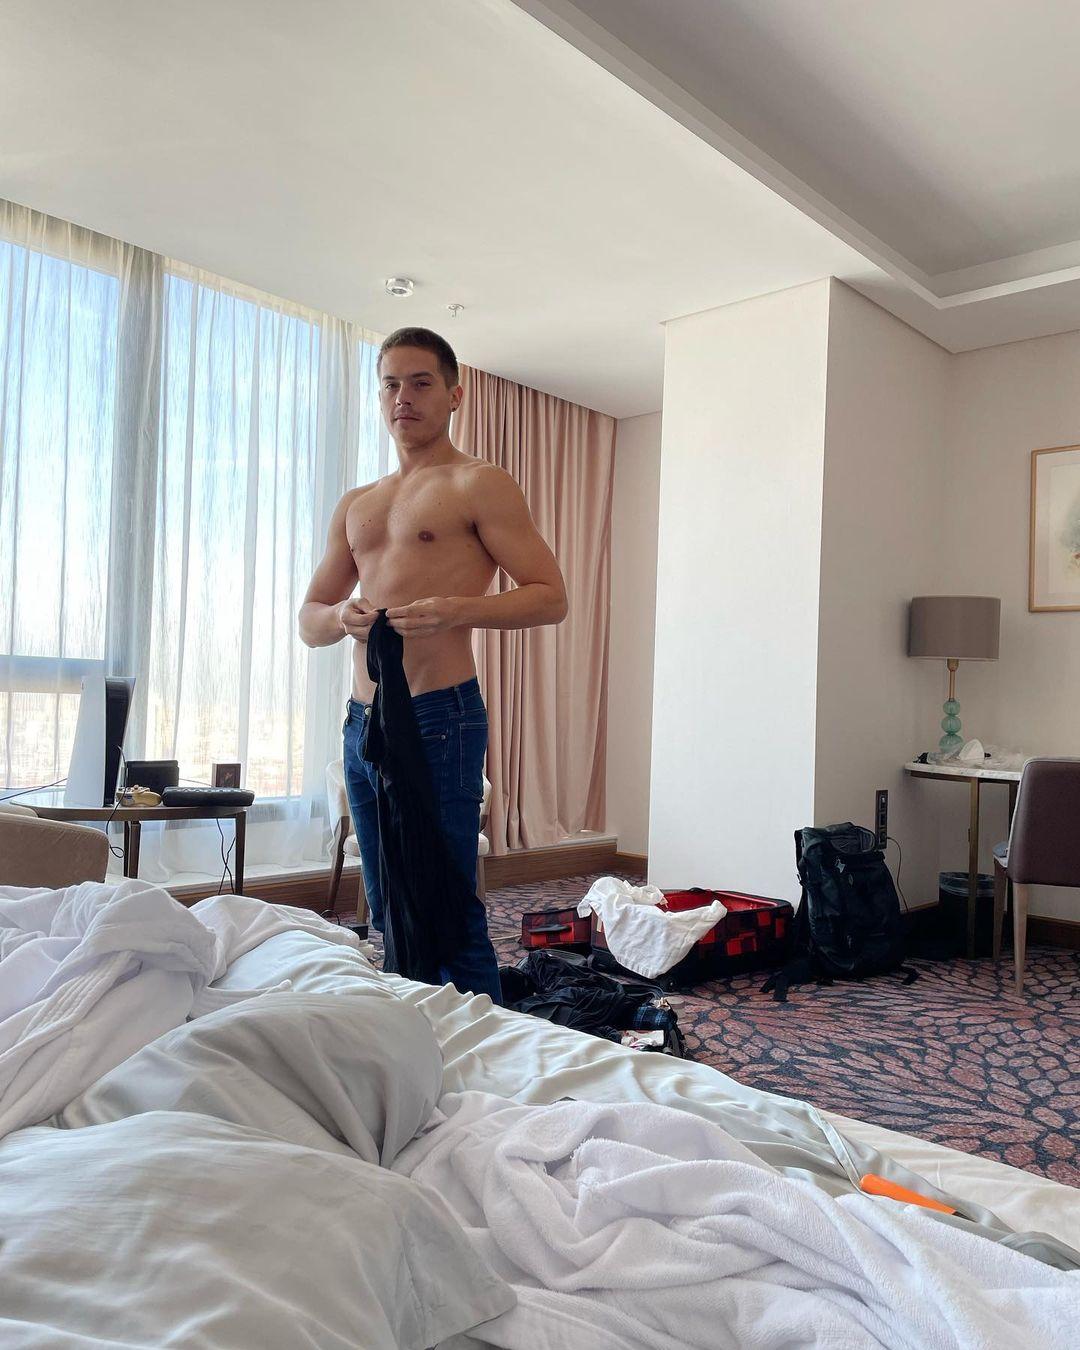 Dylan Sprouse shares his workout progress